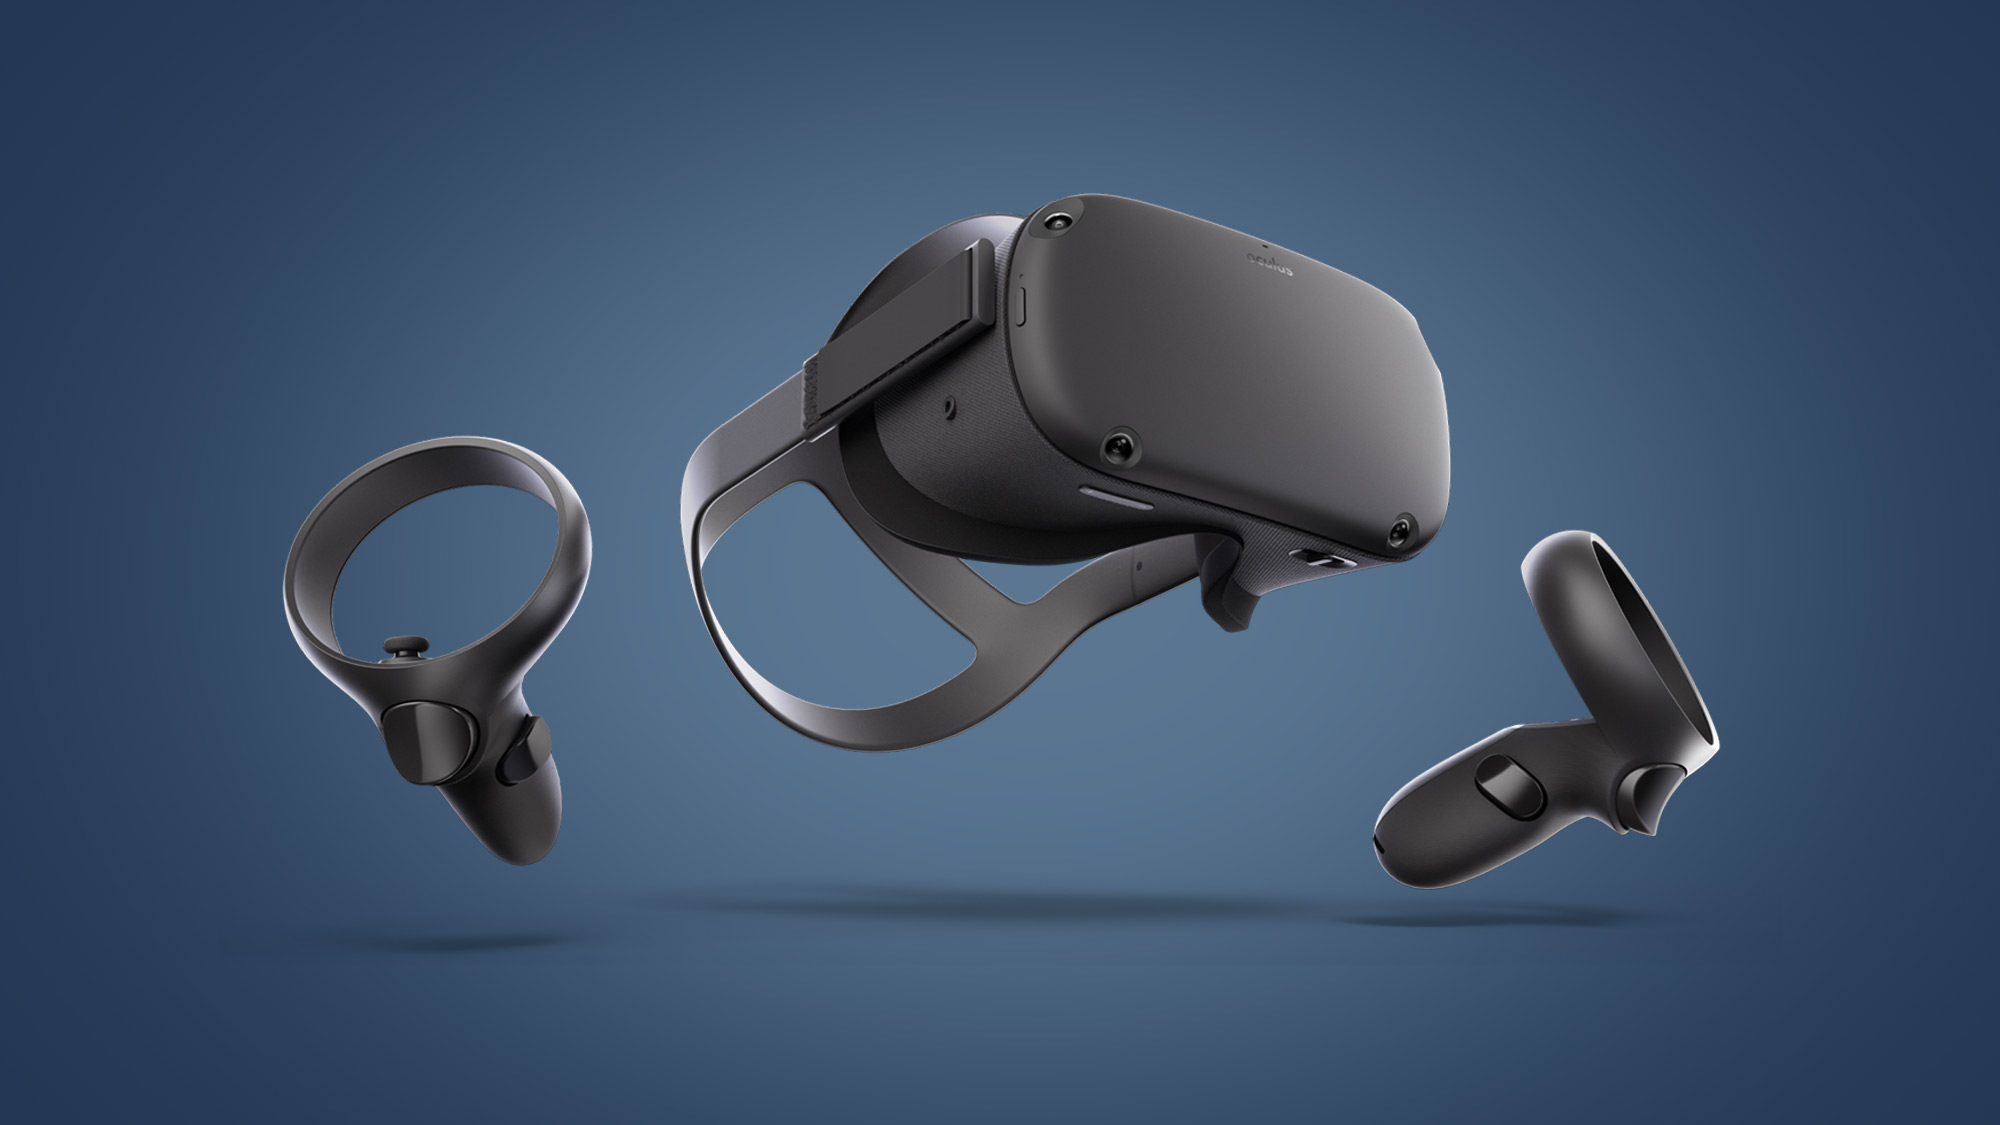 can you use the oculus rift s on ps4